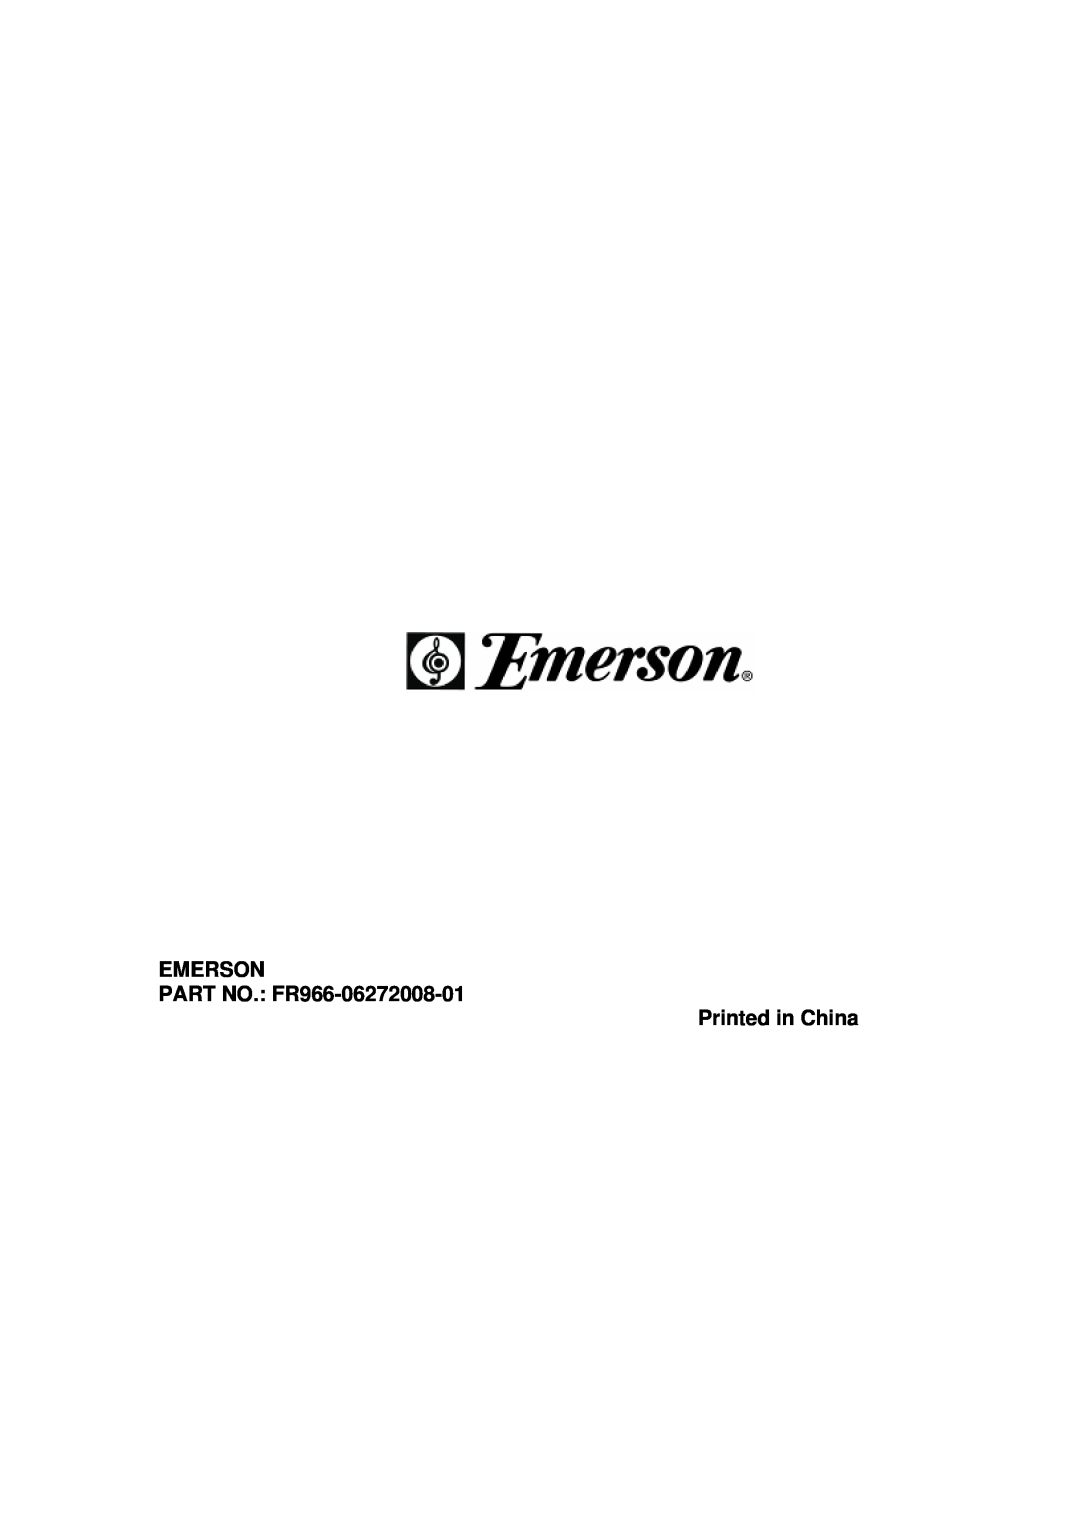 Emerson owner manual EMERSON PART NO. FR966-06272008-01 Printed in China 